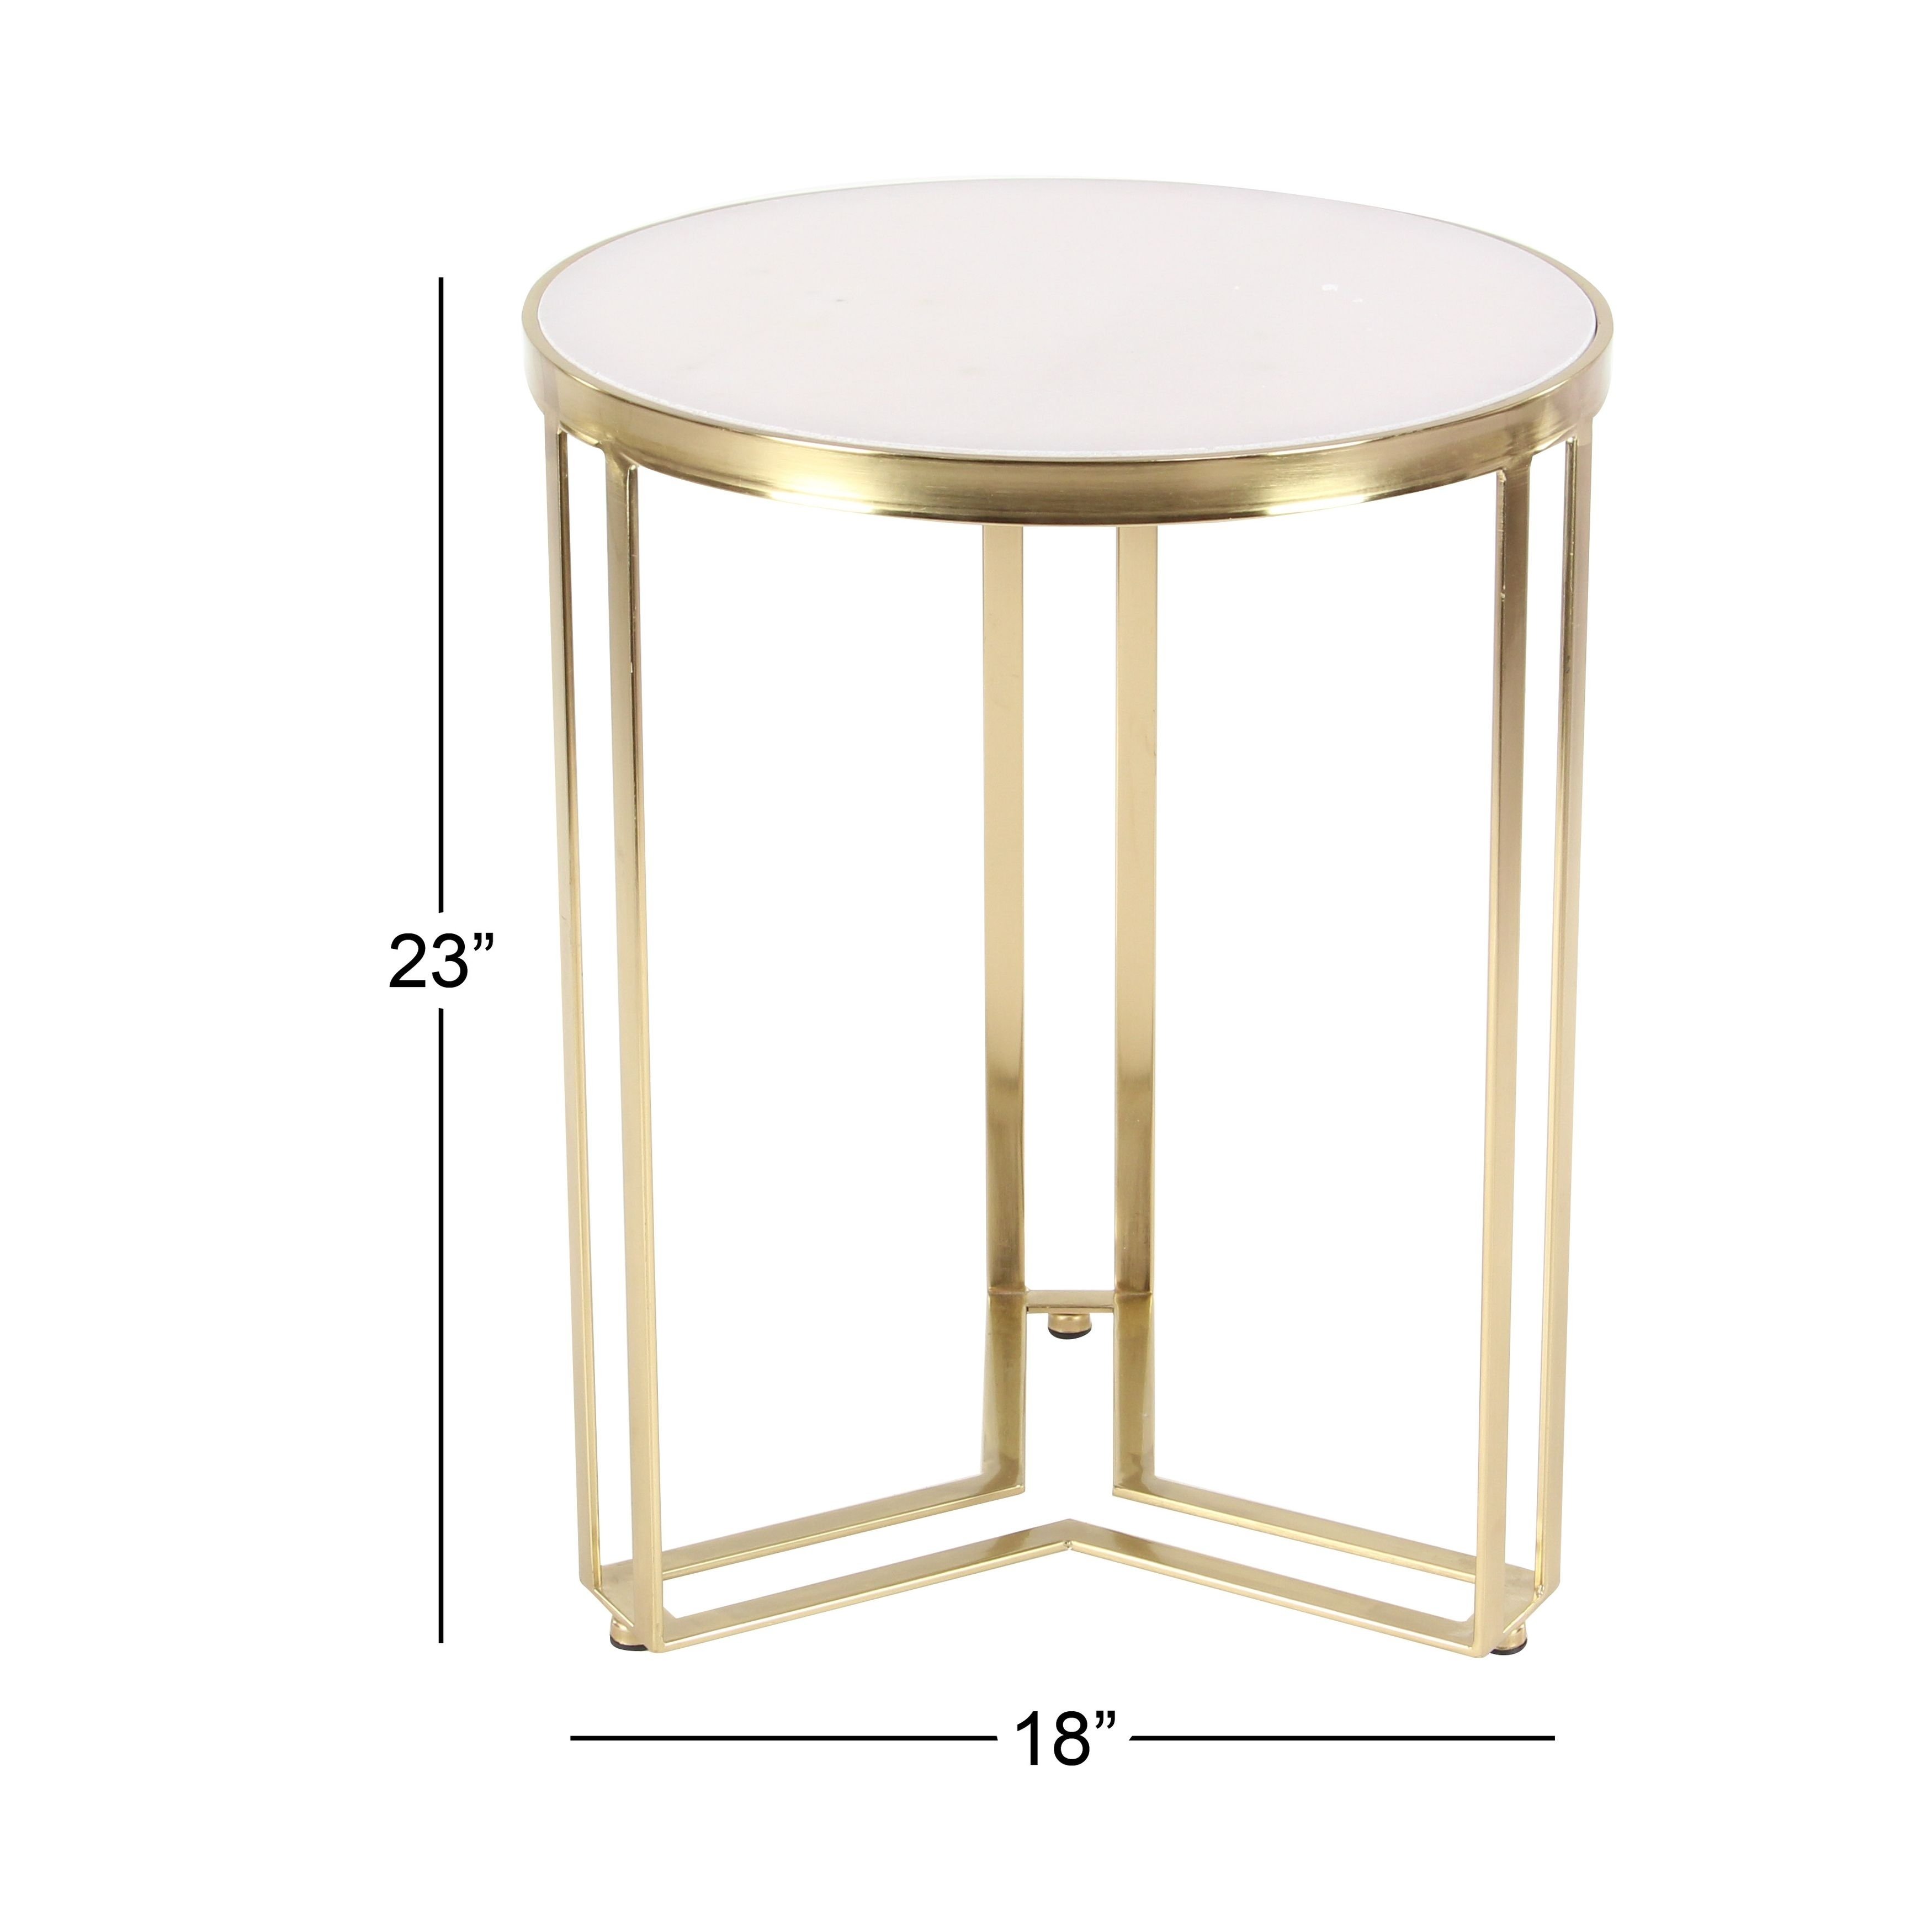 modern round iron and marble accent table free shipping today high top dining set pottery barn room tables chairs gordmans furniture bistro stools lucite brass coffee pagoda